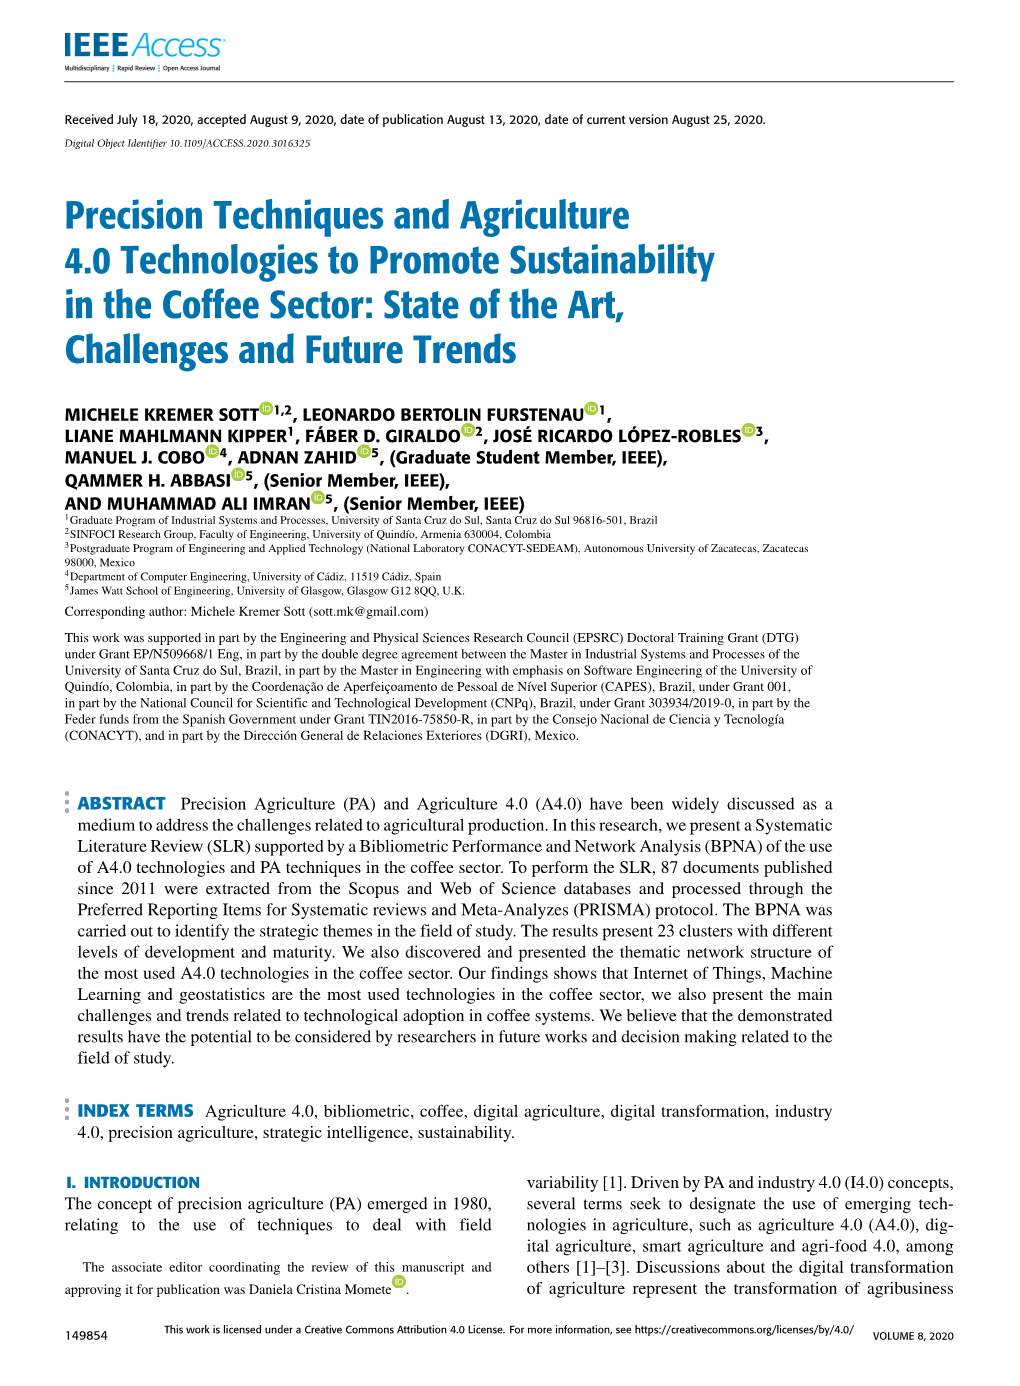 Precision Techniques and Agriculture 4.0 Technologies to Promote Sustainability in the Coffee Sector: State of the Art, Challenges and Future Trends